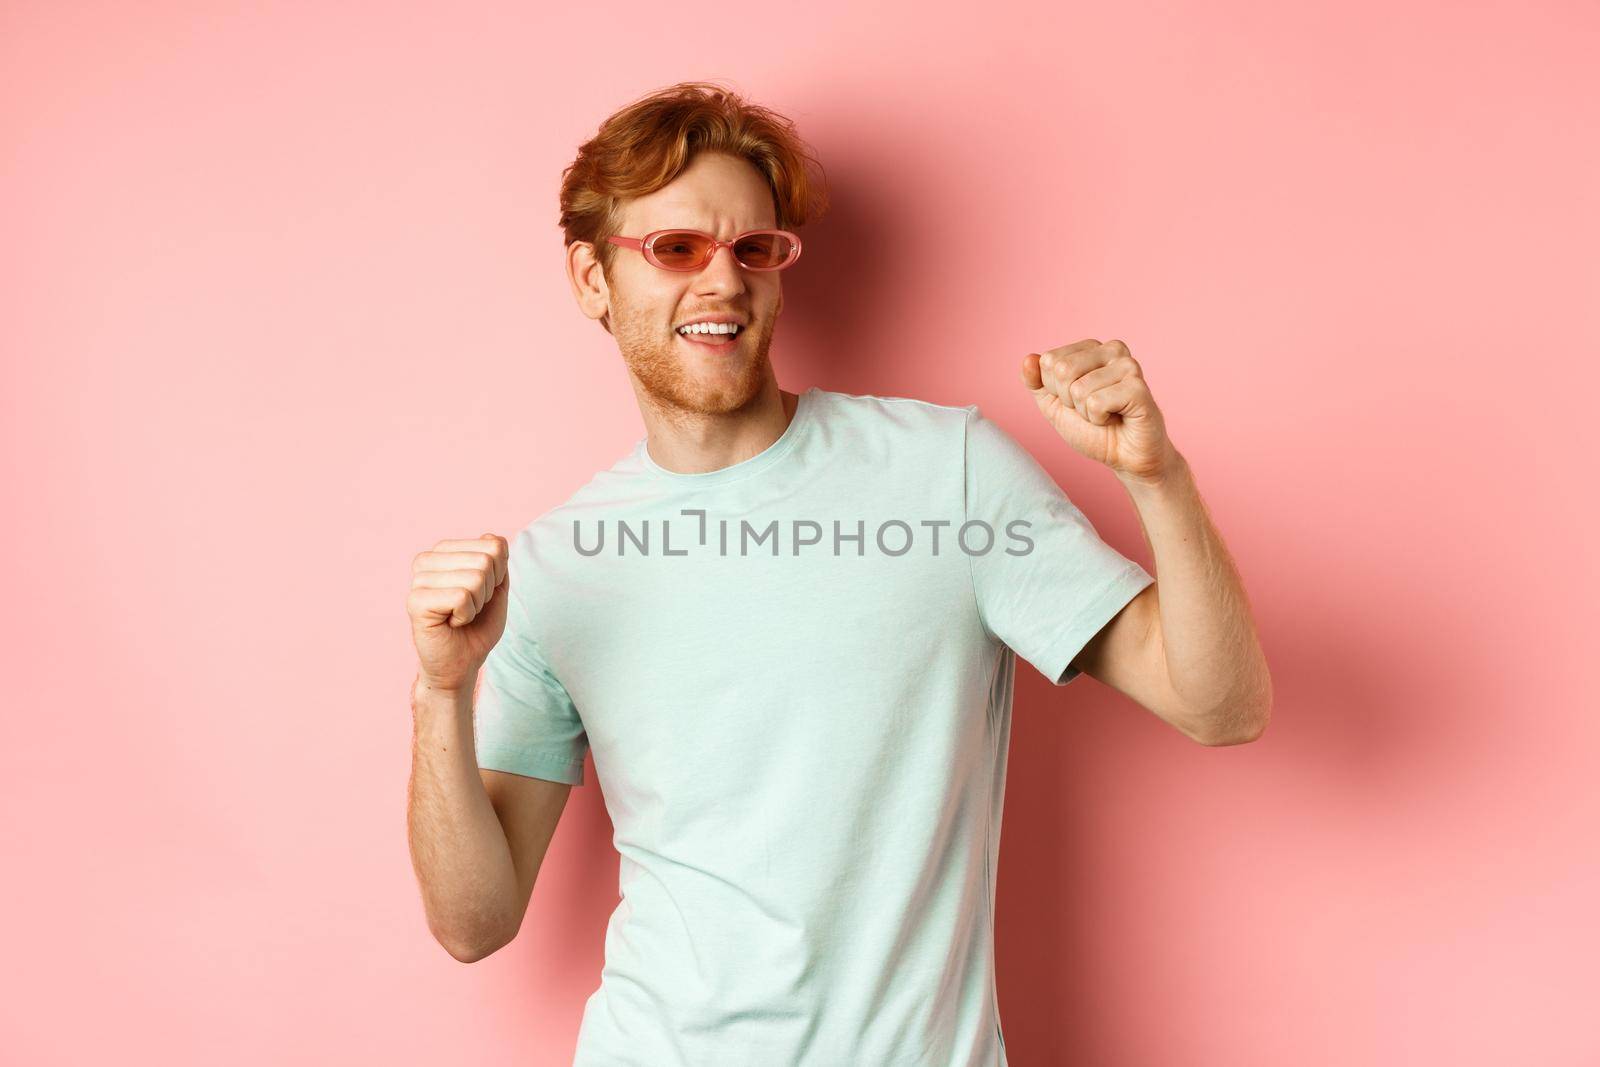 Tourism and vacation concept. Cheerful redhead man having fun at party, dancing and enjoying holiday, standing in sunglasses and t-shirt against pink background.